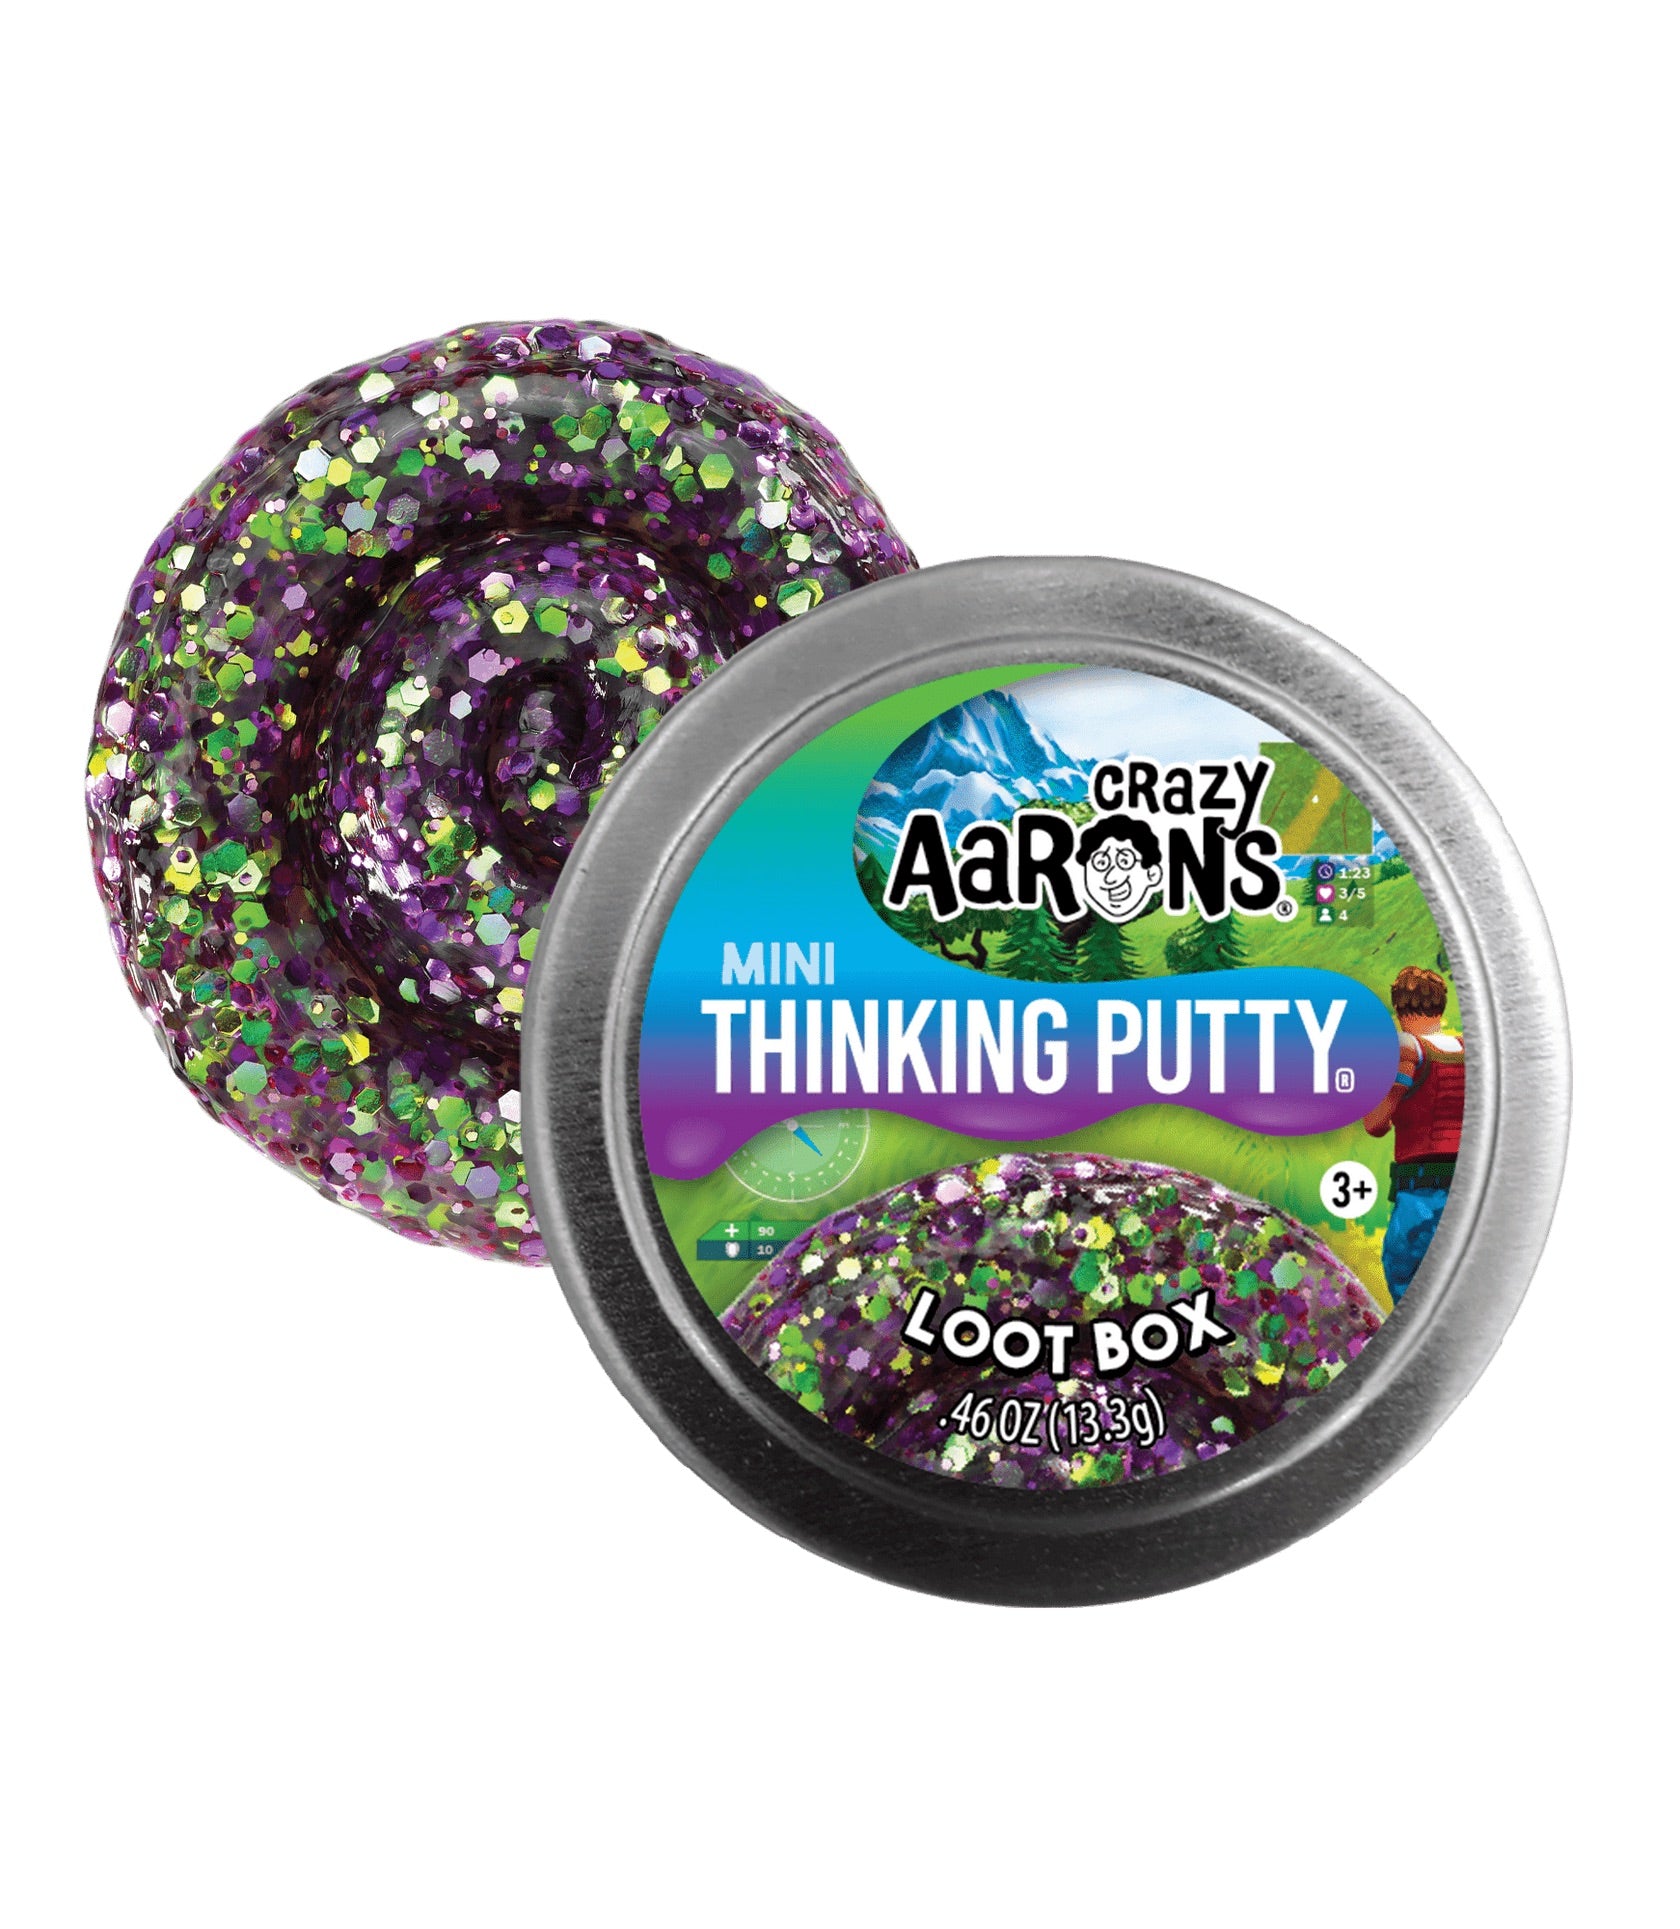 Loot Box Thinking Putty 2” Tin by Crazy Aaron’s #LX003